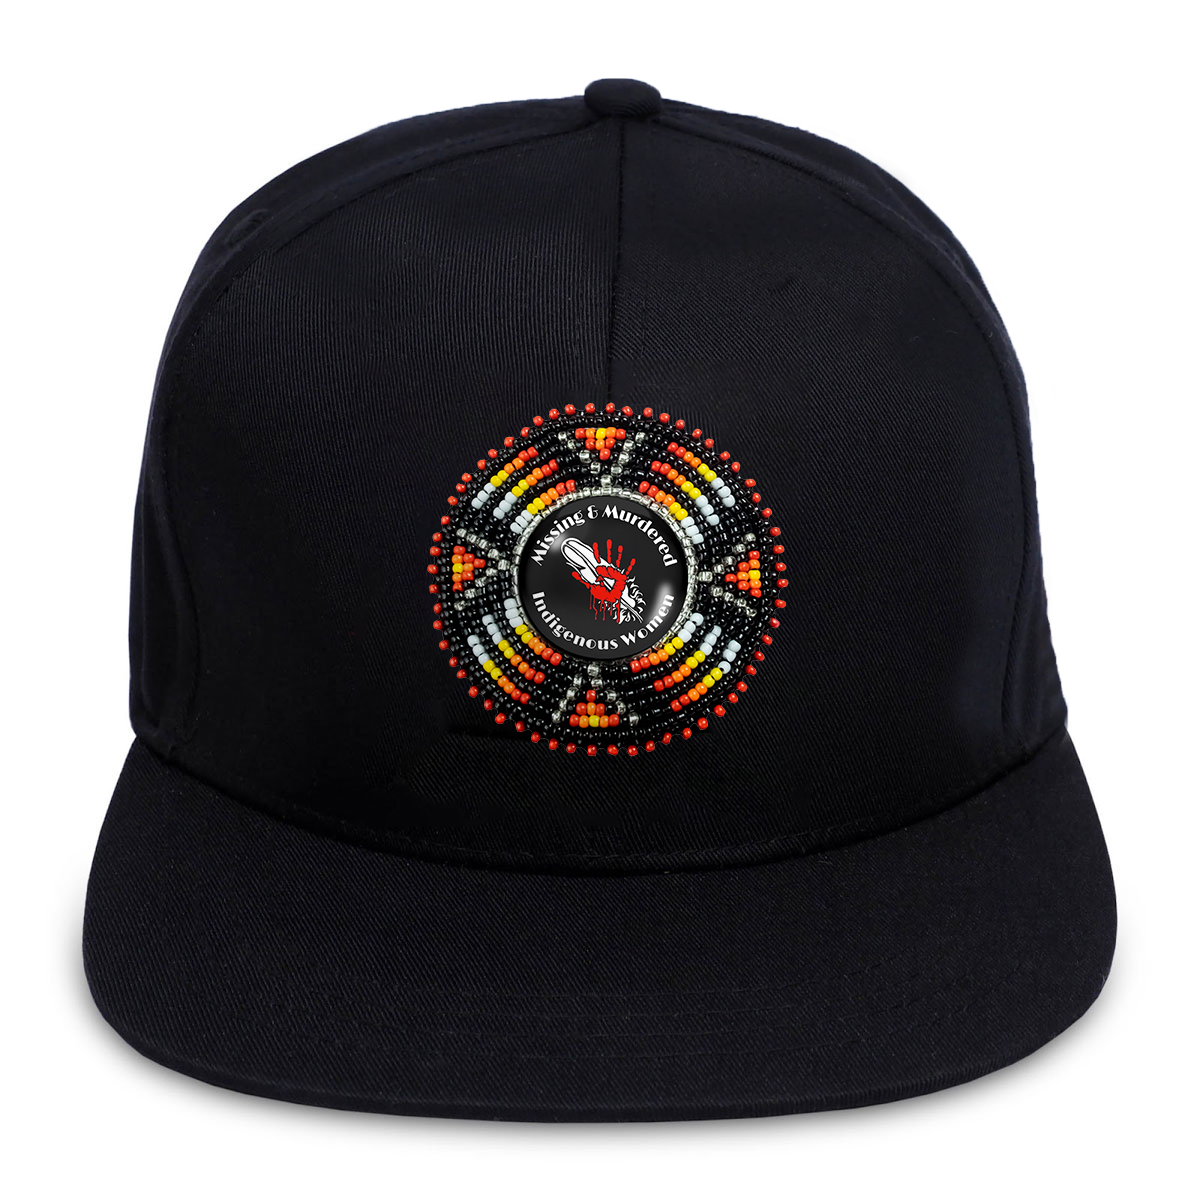 SALE 50% OFF - MMIW Beaded Snapback With Patch Cotton Cap Unisex Native American Style